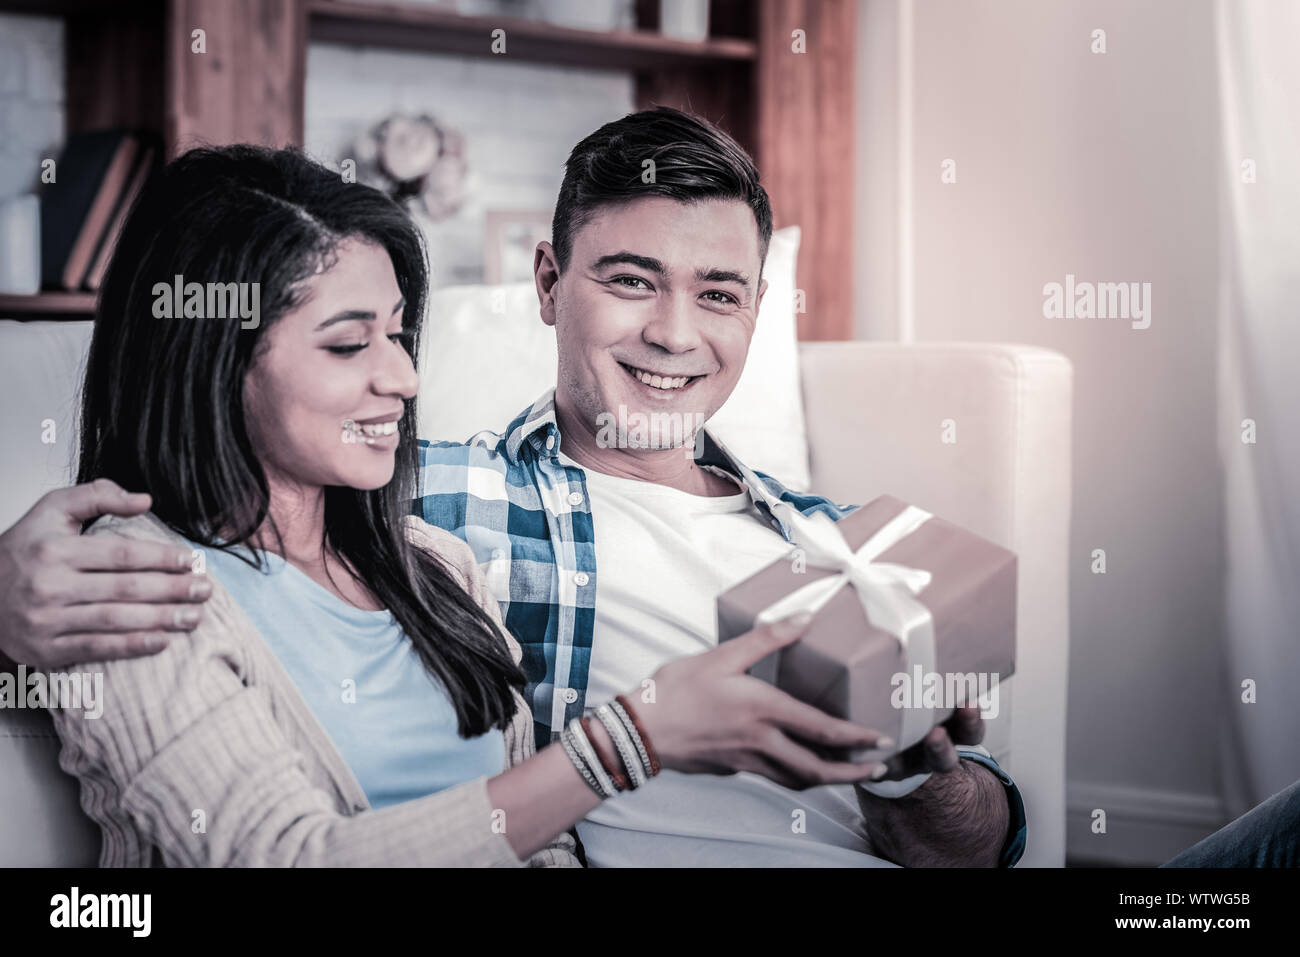 Smiling man delightedly giving decorated box to his girl Stock Photo